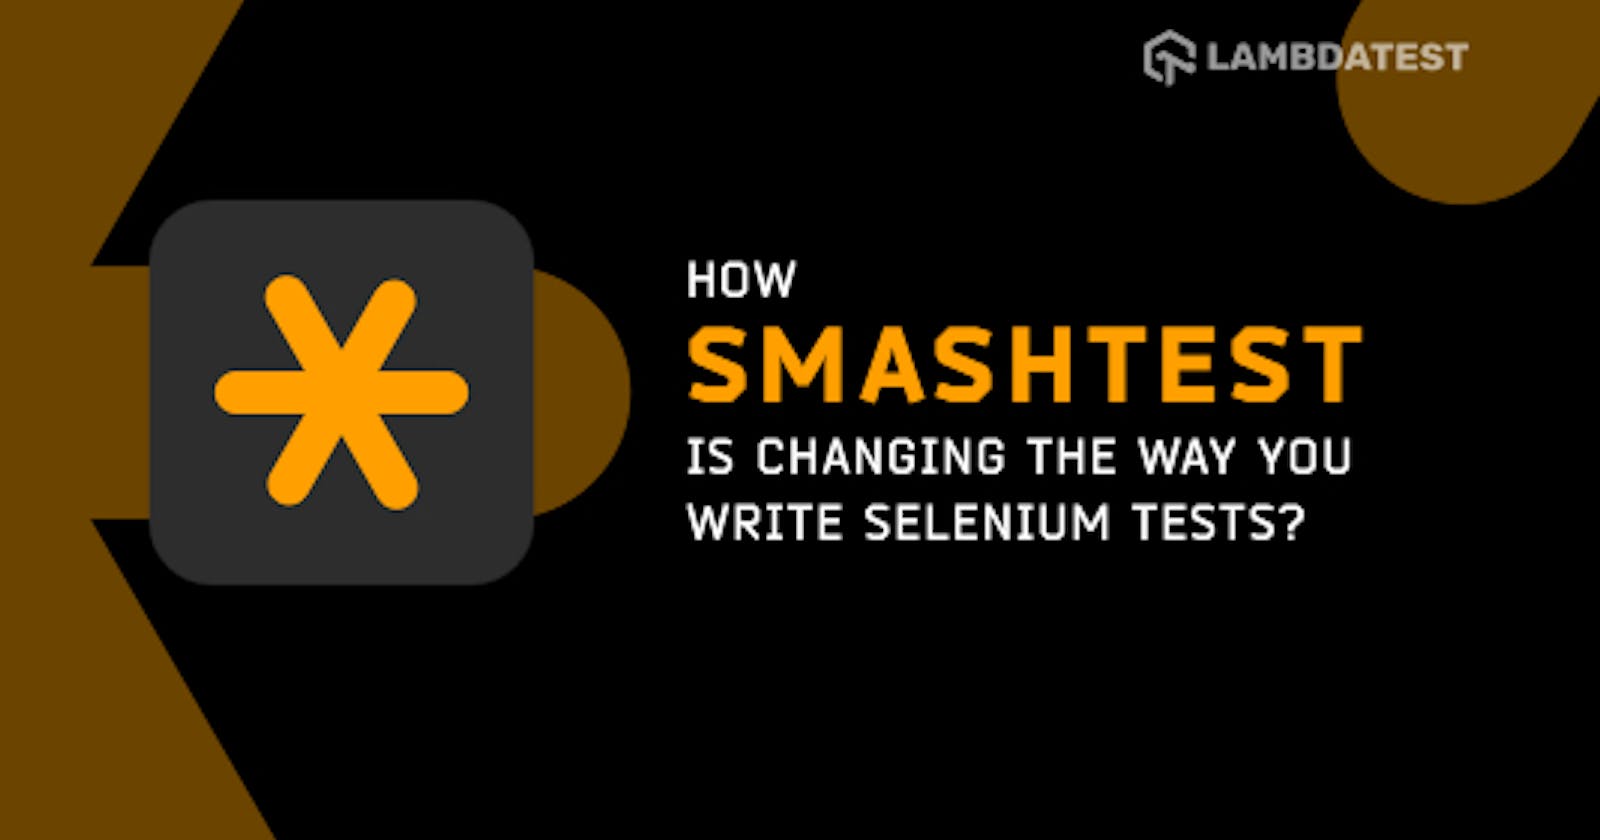 How Smashtest Is Changing The Way You Write Selenium Tests?